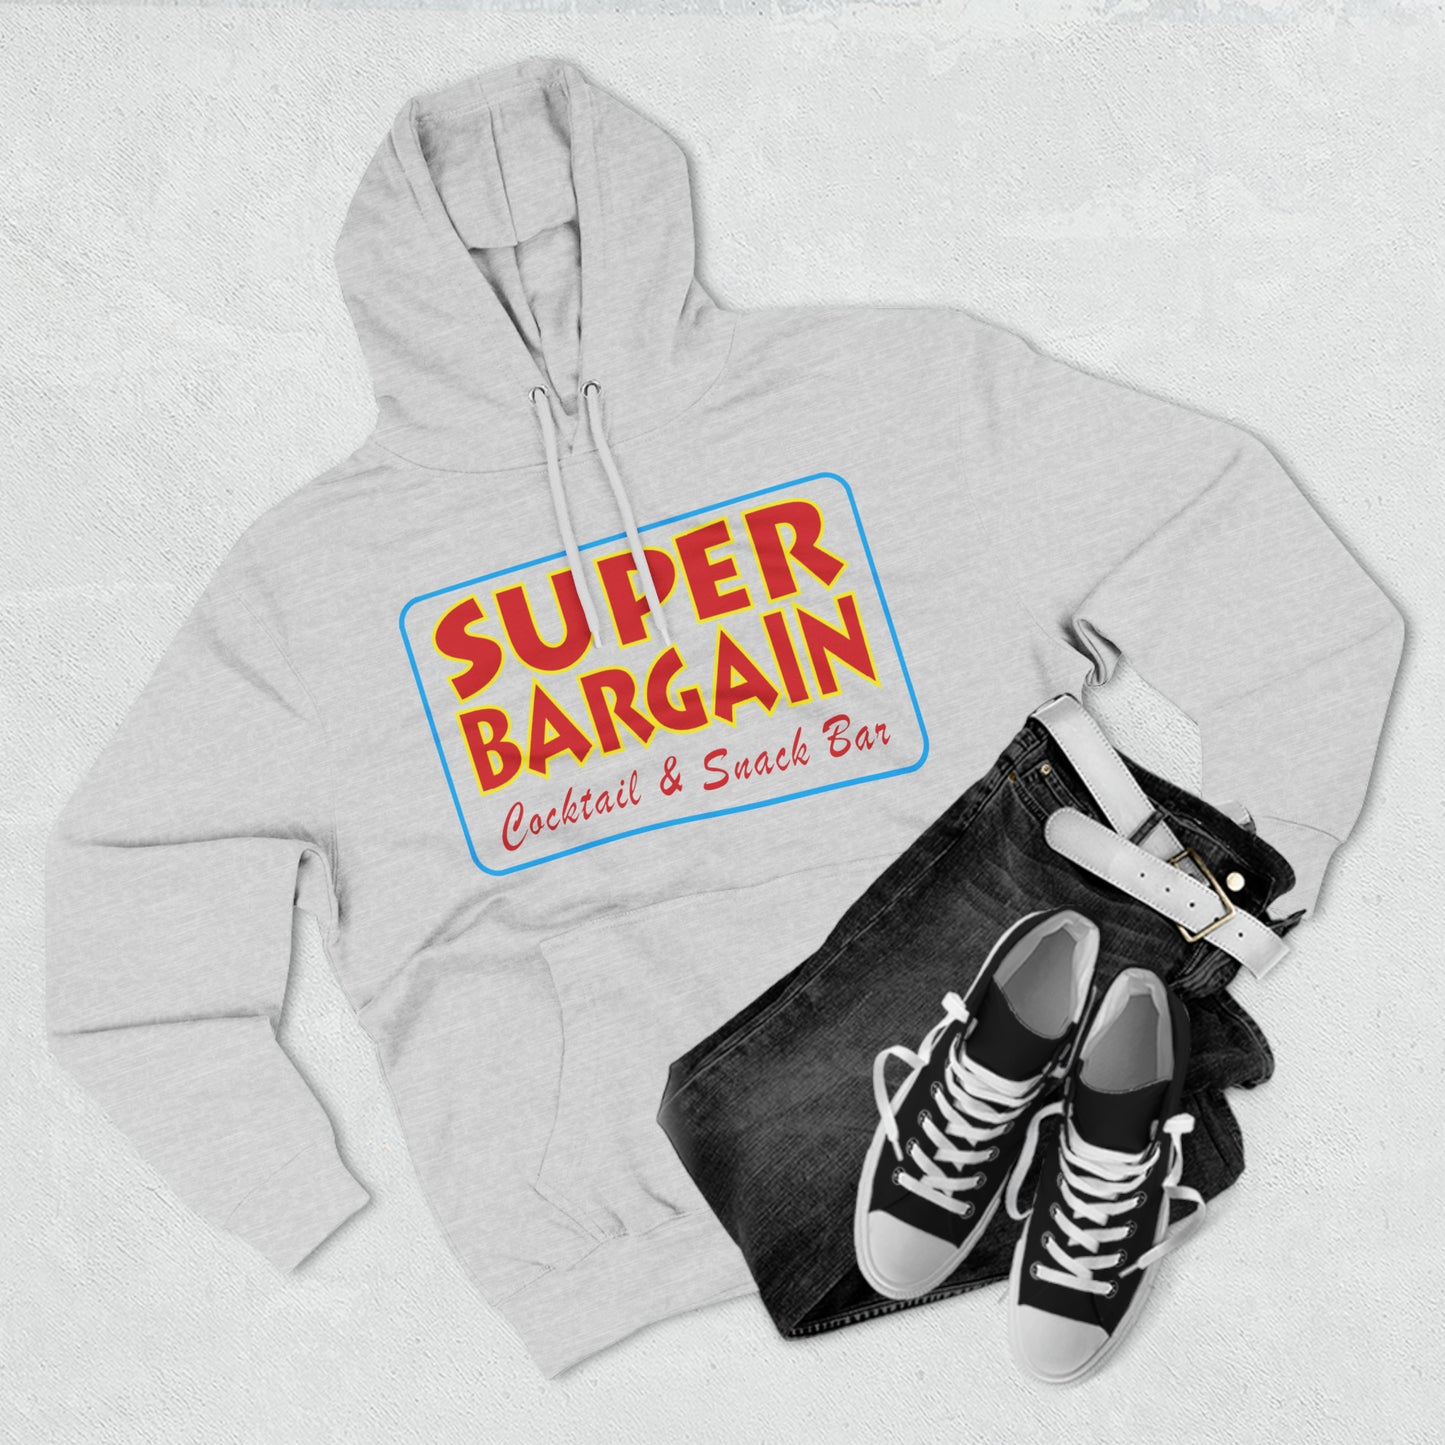 A flat lay of a gray "Printify Unisex Premium Pullover Hoodie" with "Cabbagetown Super Bargain Cocktail & Snack Bar" logo, paired with dark jeans and black sneakers, all arranged on a textured white background.